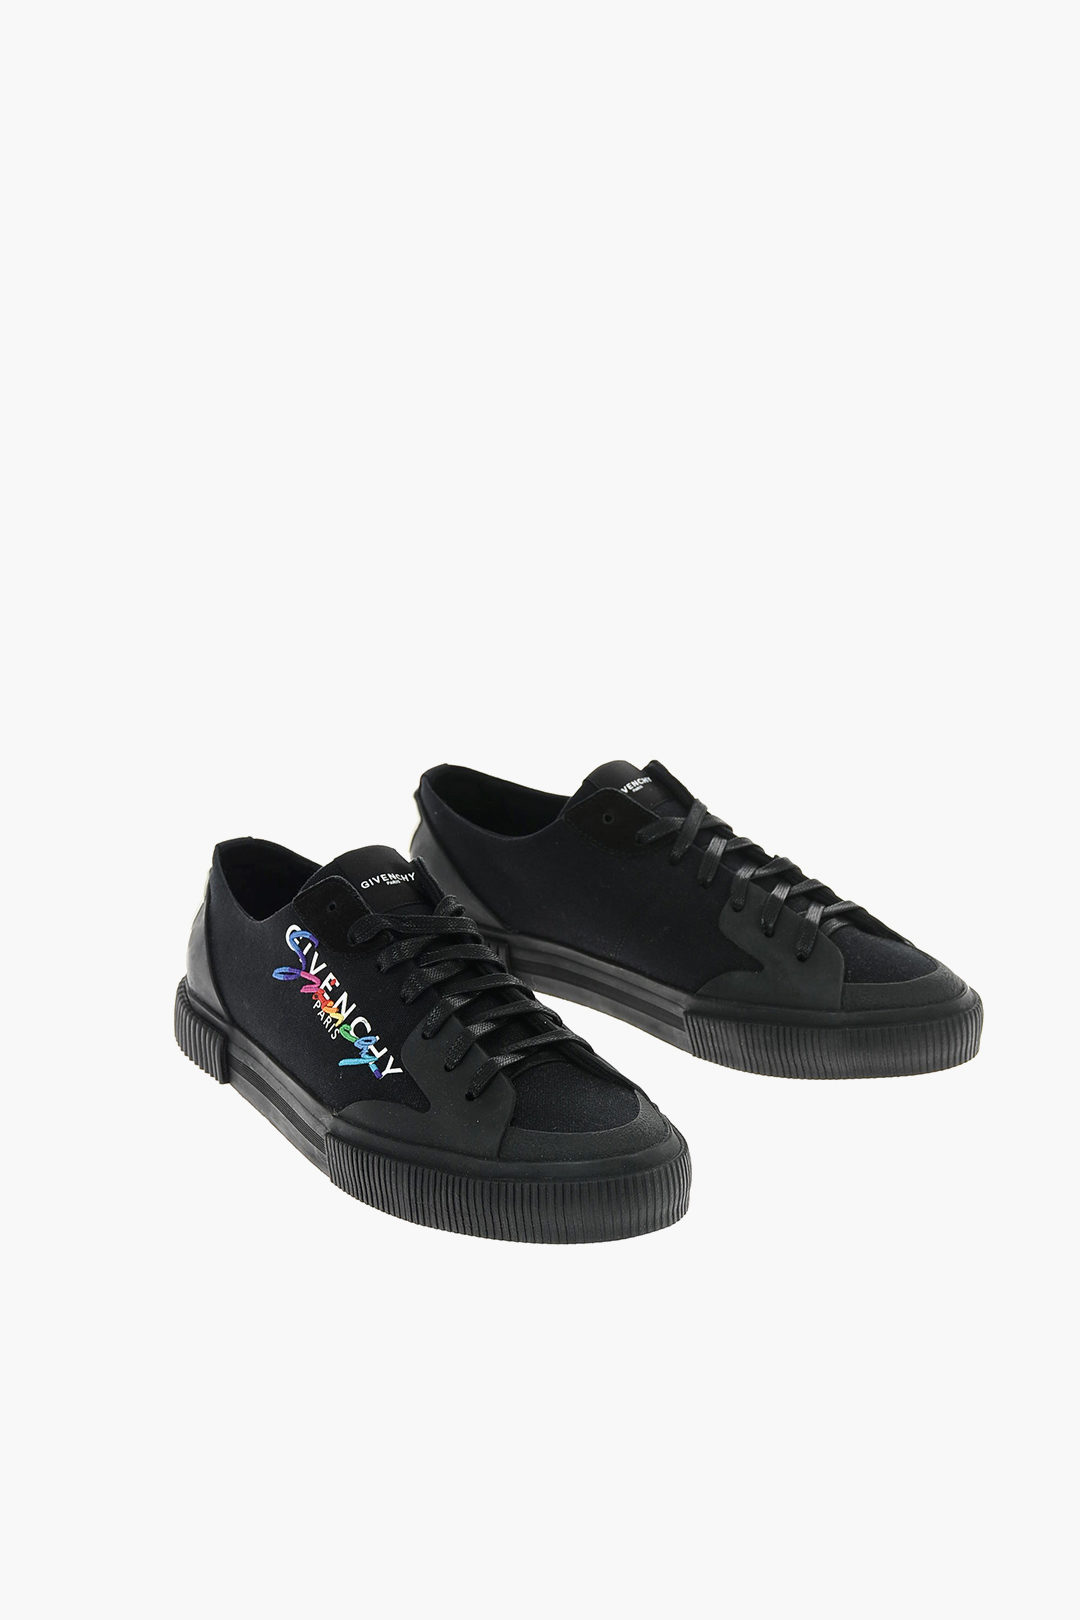 GIVENCHY 4G logo-embossed leather sneakers | NET-A-PORTER